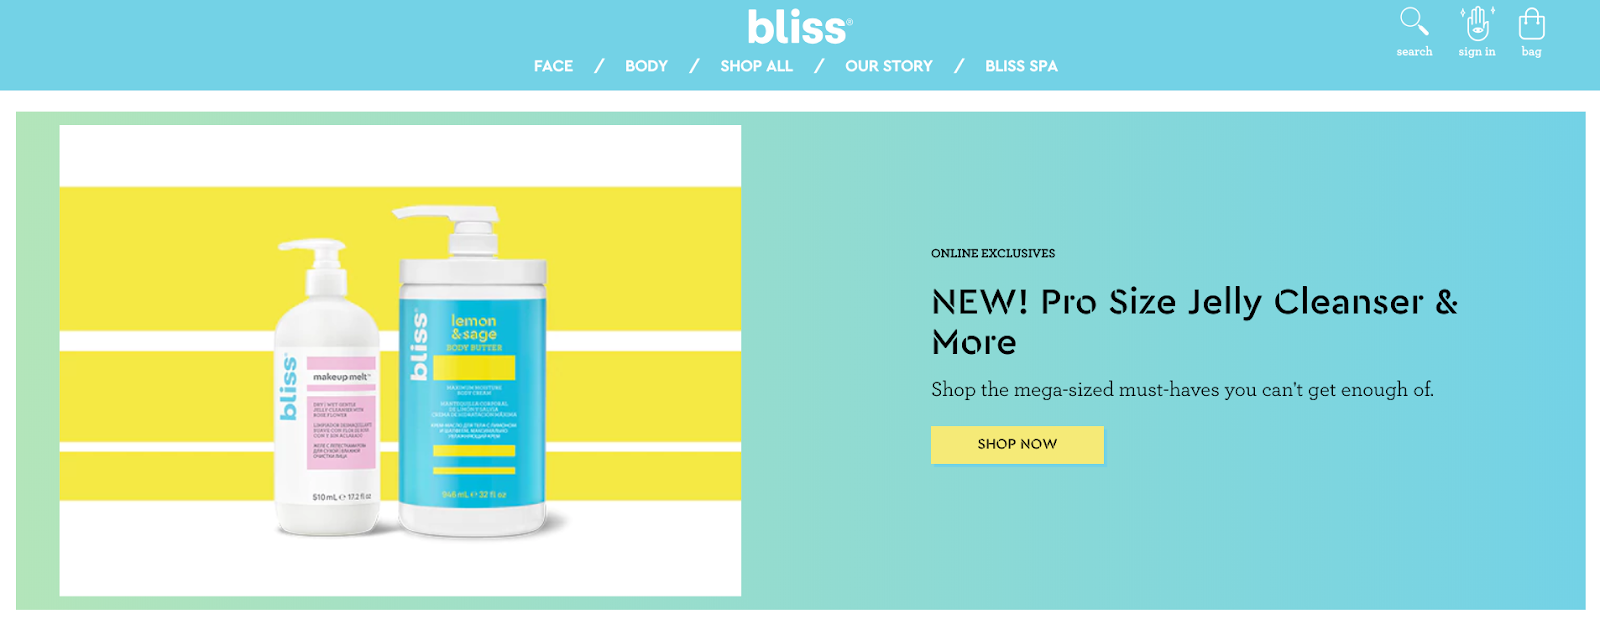 Bliss home page